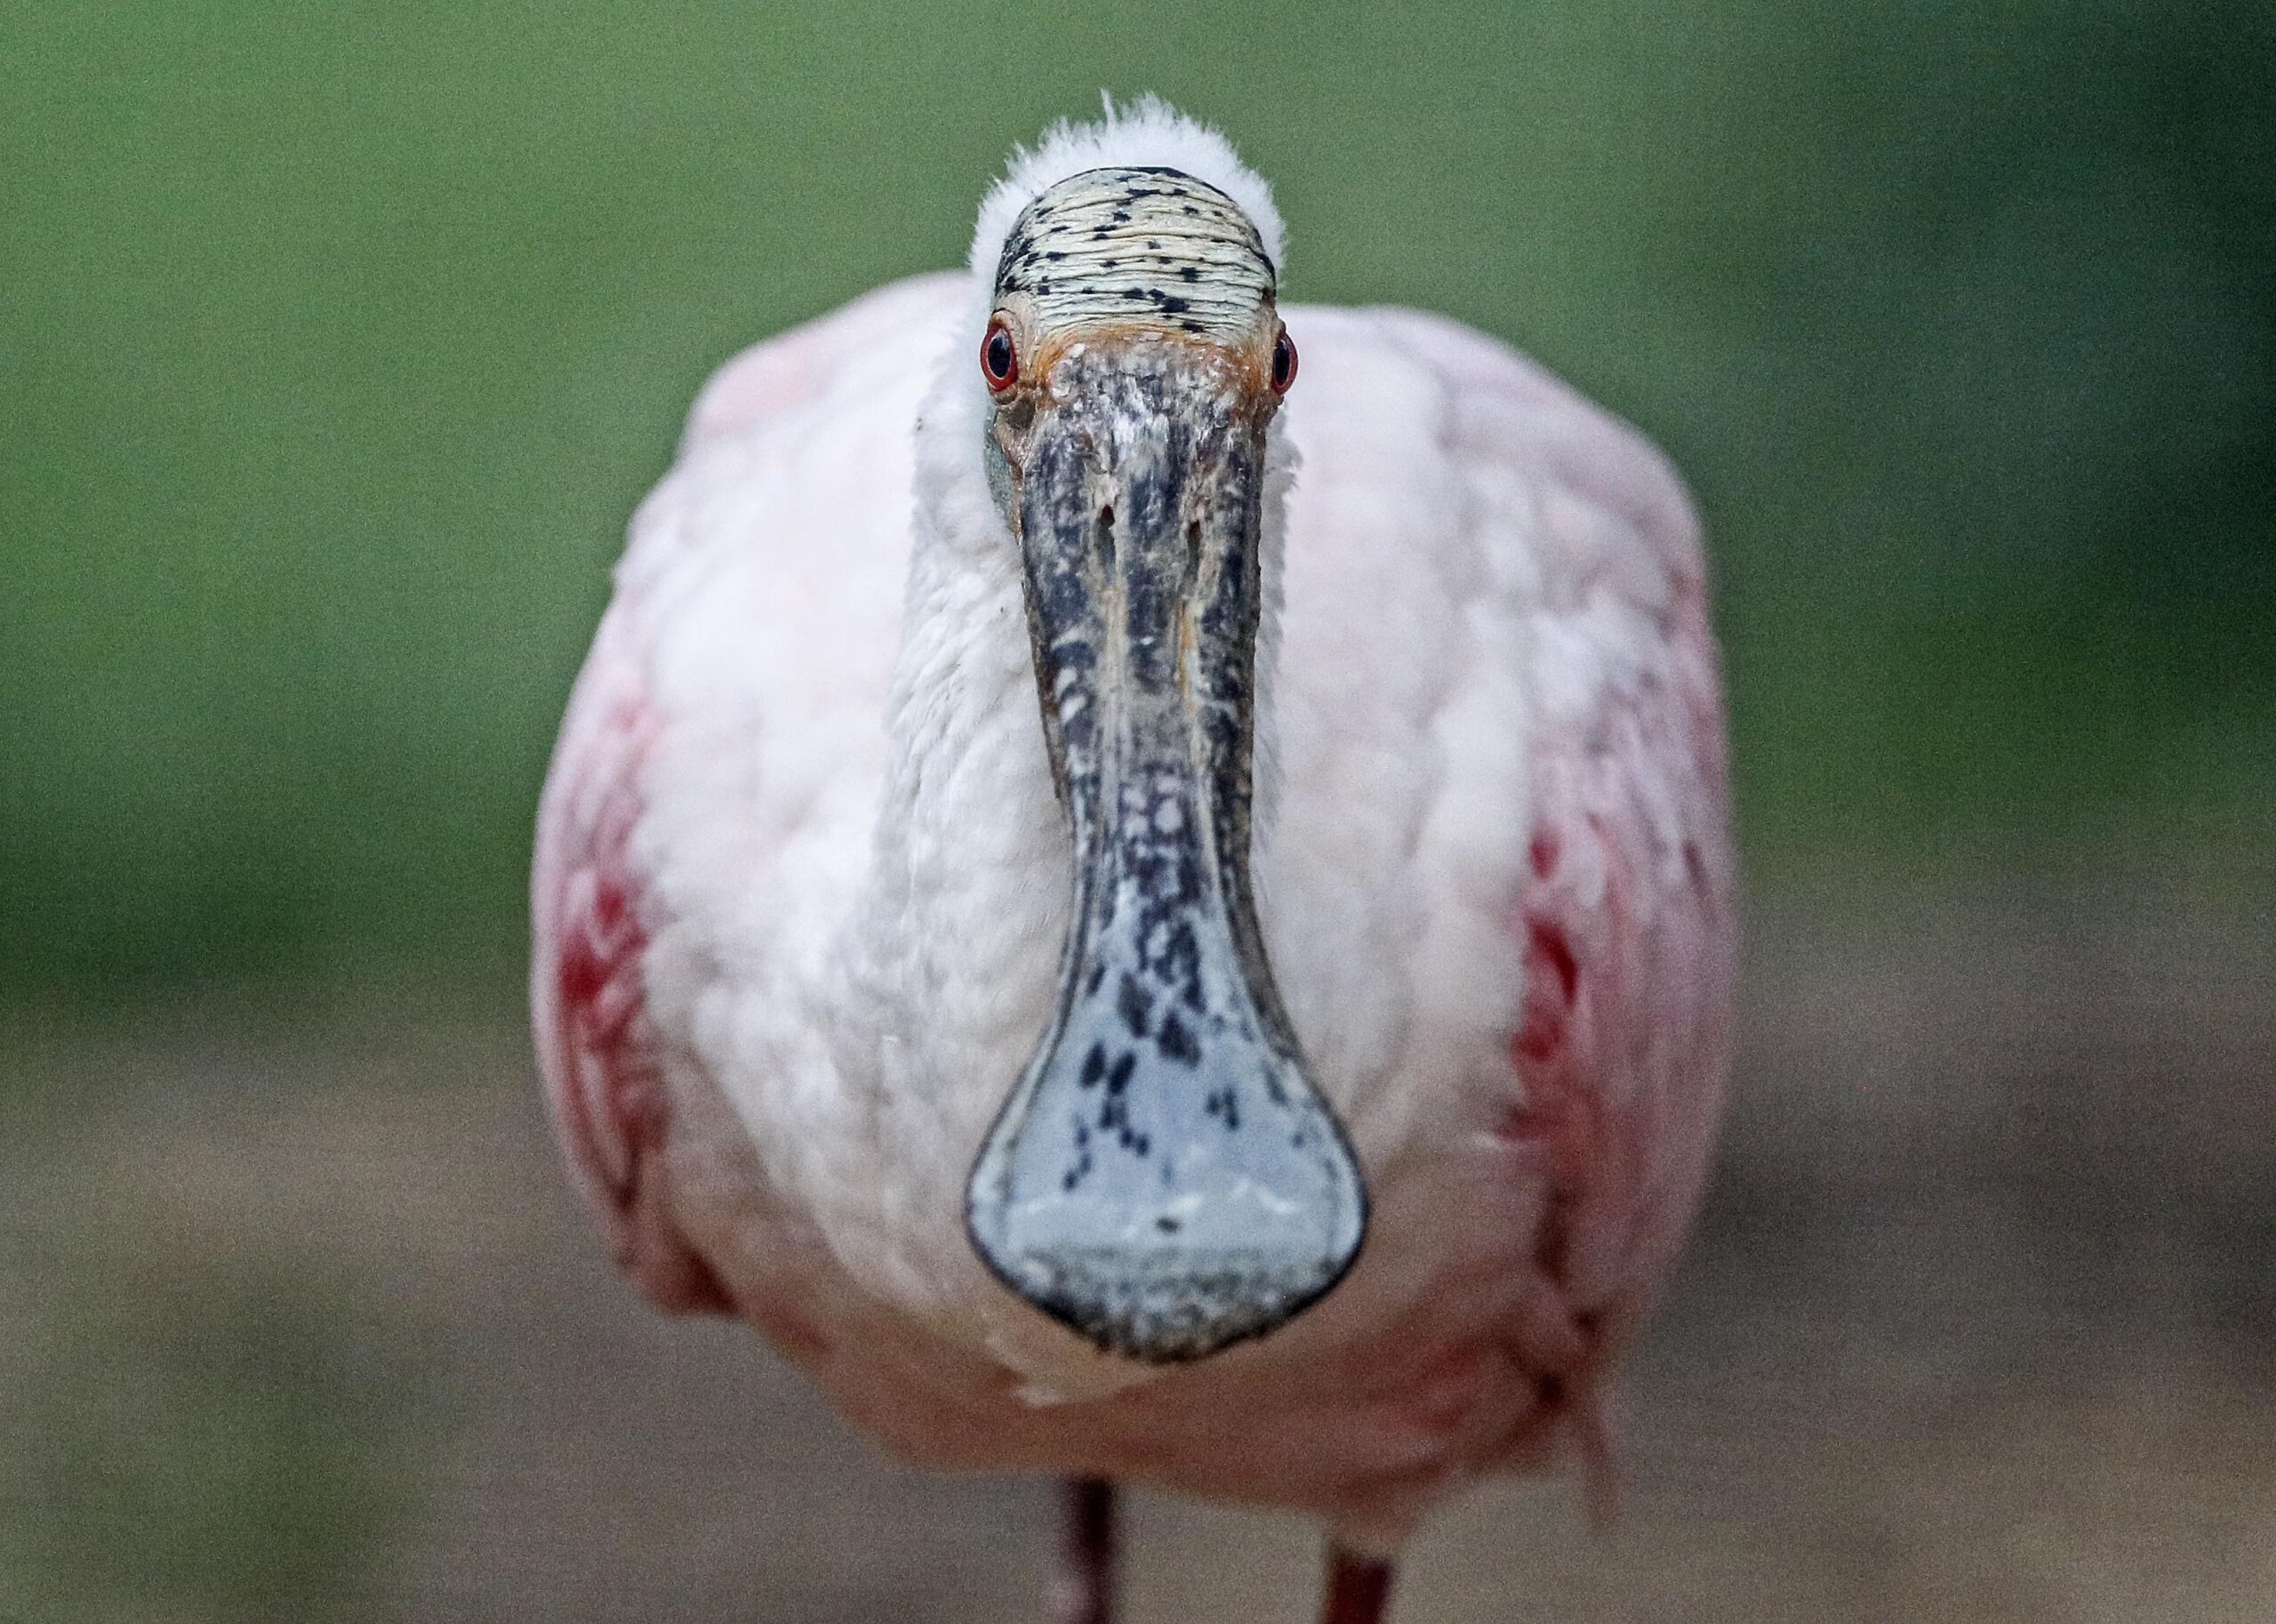 Birders flocking to Green Bay to see ‘mega-rarity’ roseate spoonbill